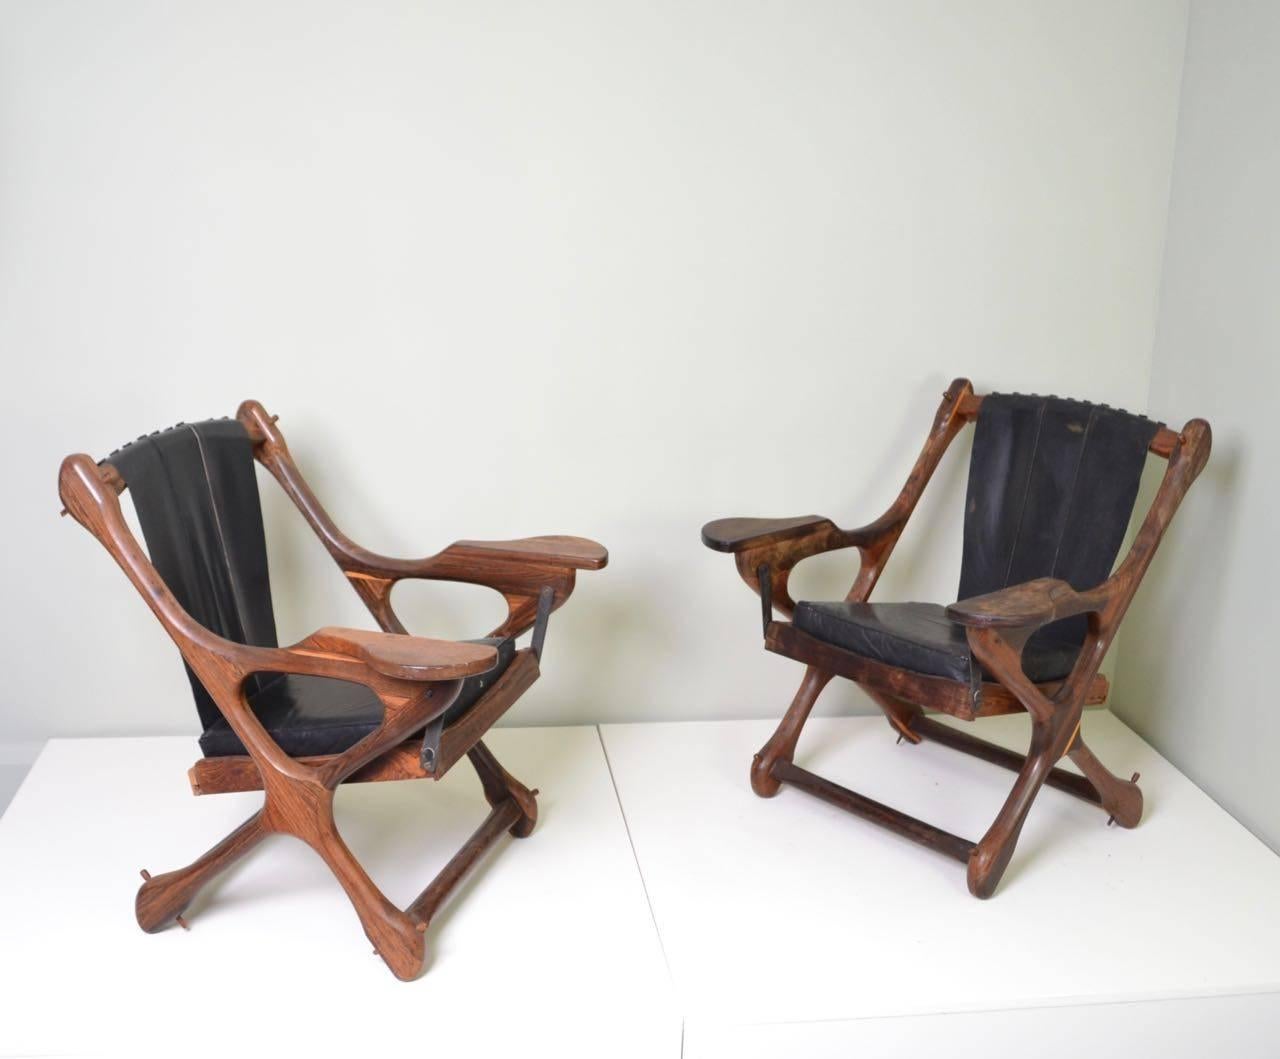 Pair of lounge chairs with rocking seats designed by Don Shoemaker
and retaining original 'Senal, Mexico' manufacturers label.
Cocobolo wood with black leather.
                